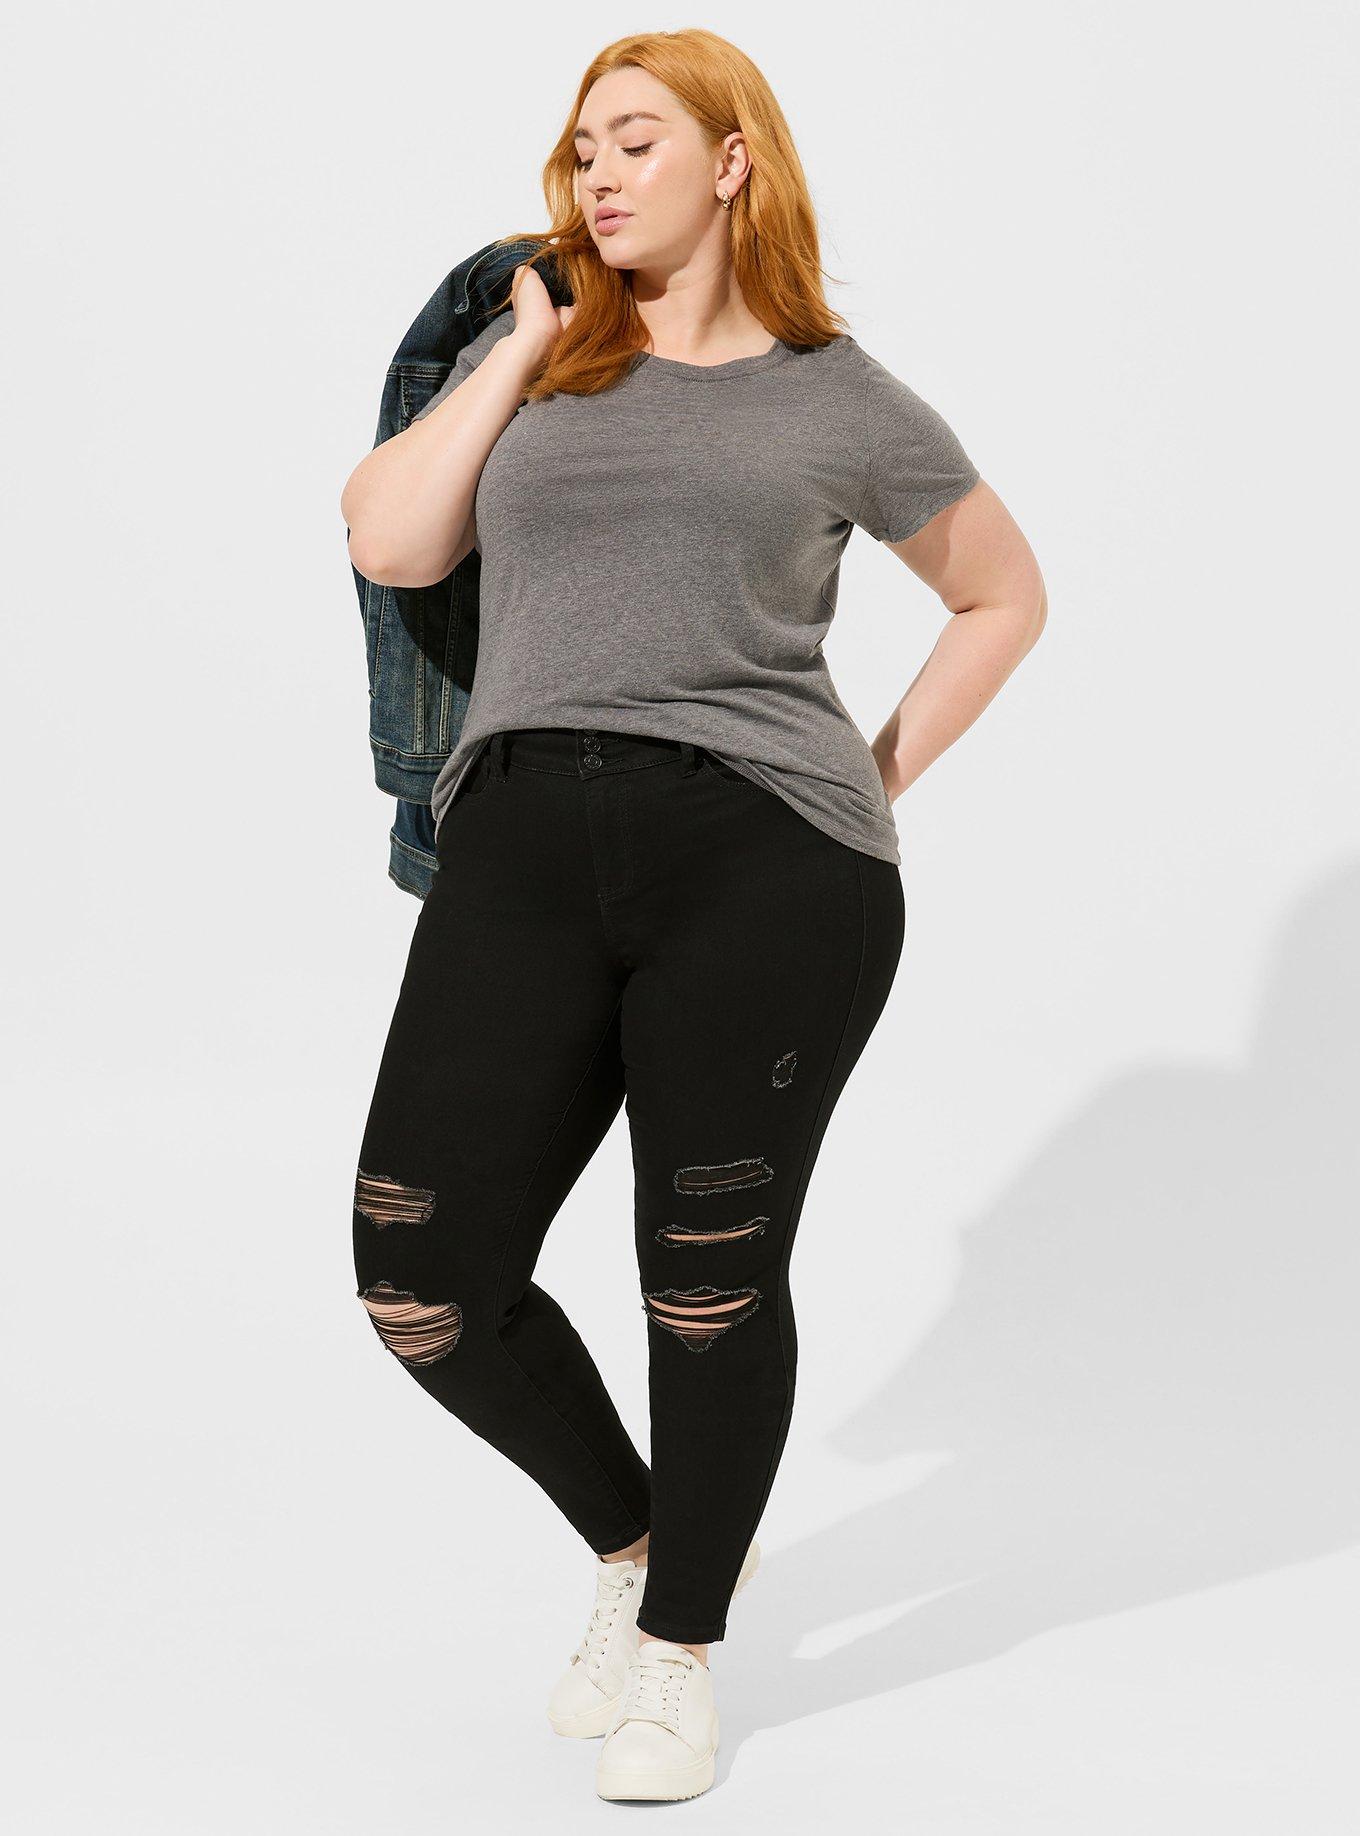 Tuck in any extra skin, leggings, woman, Wondering why more and more  women love these high-waisted leggings? ❤️